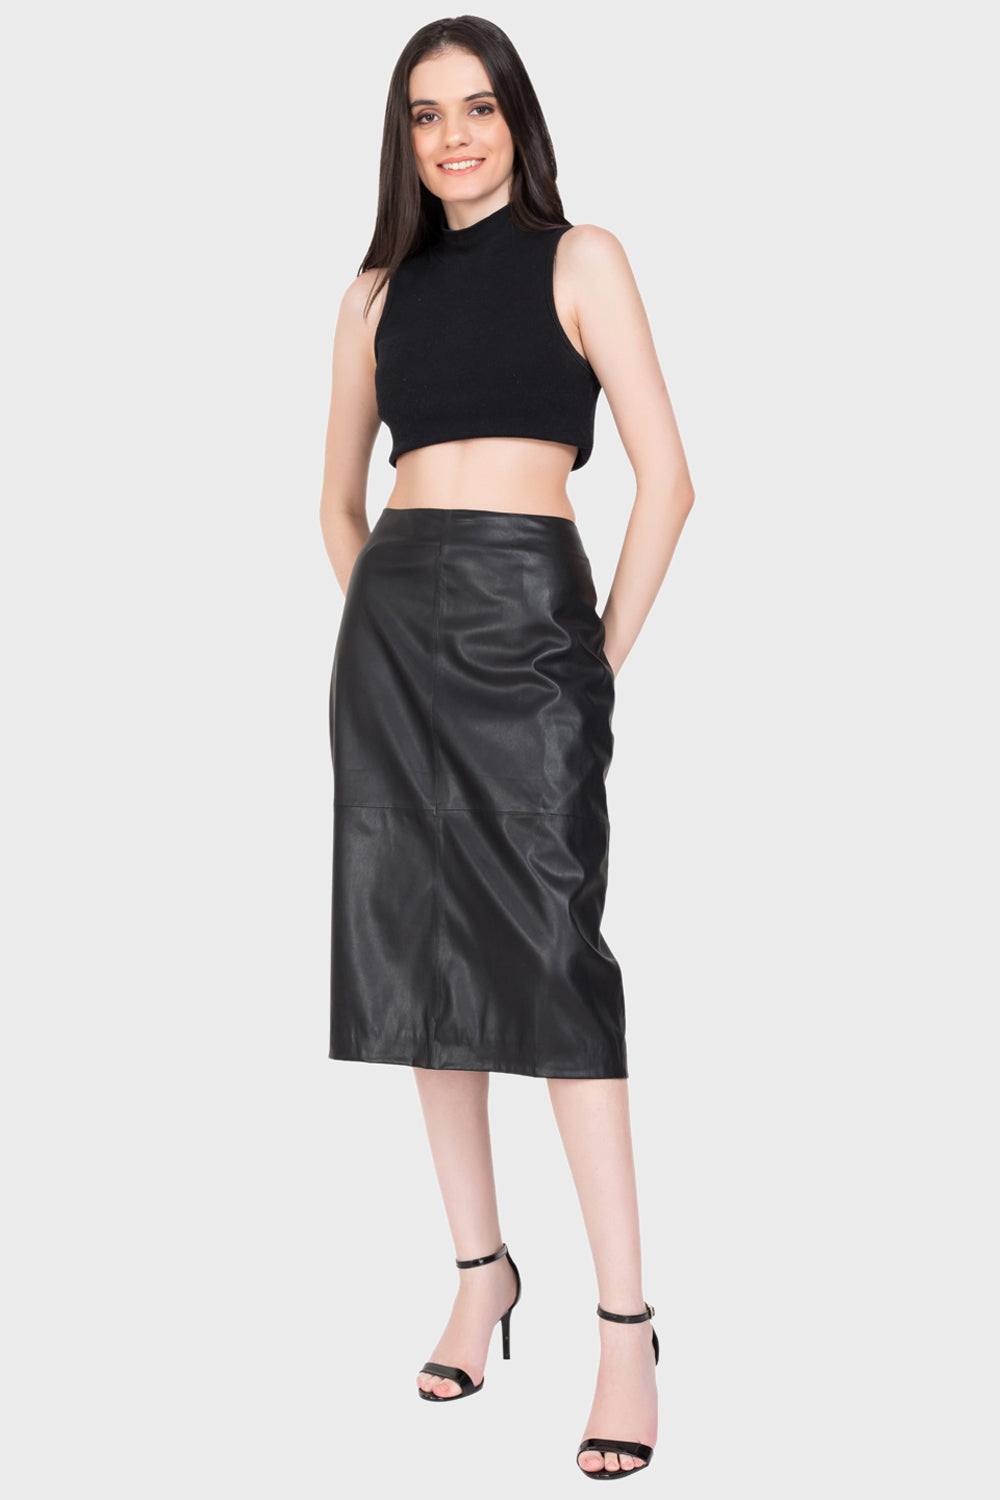 Express leather skirt | Leather skirt, Black leather skirts, Clothes design